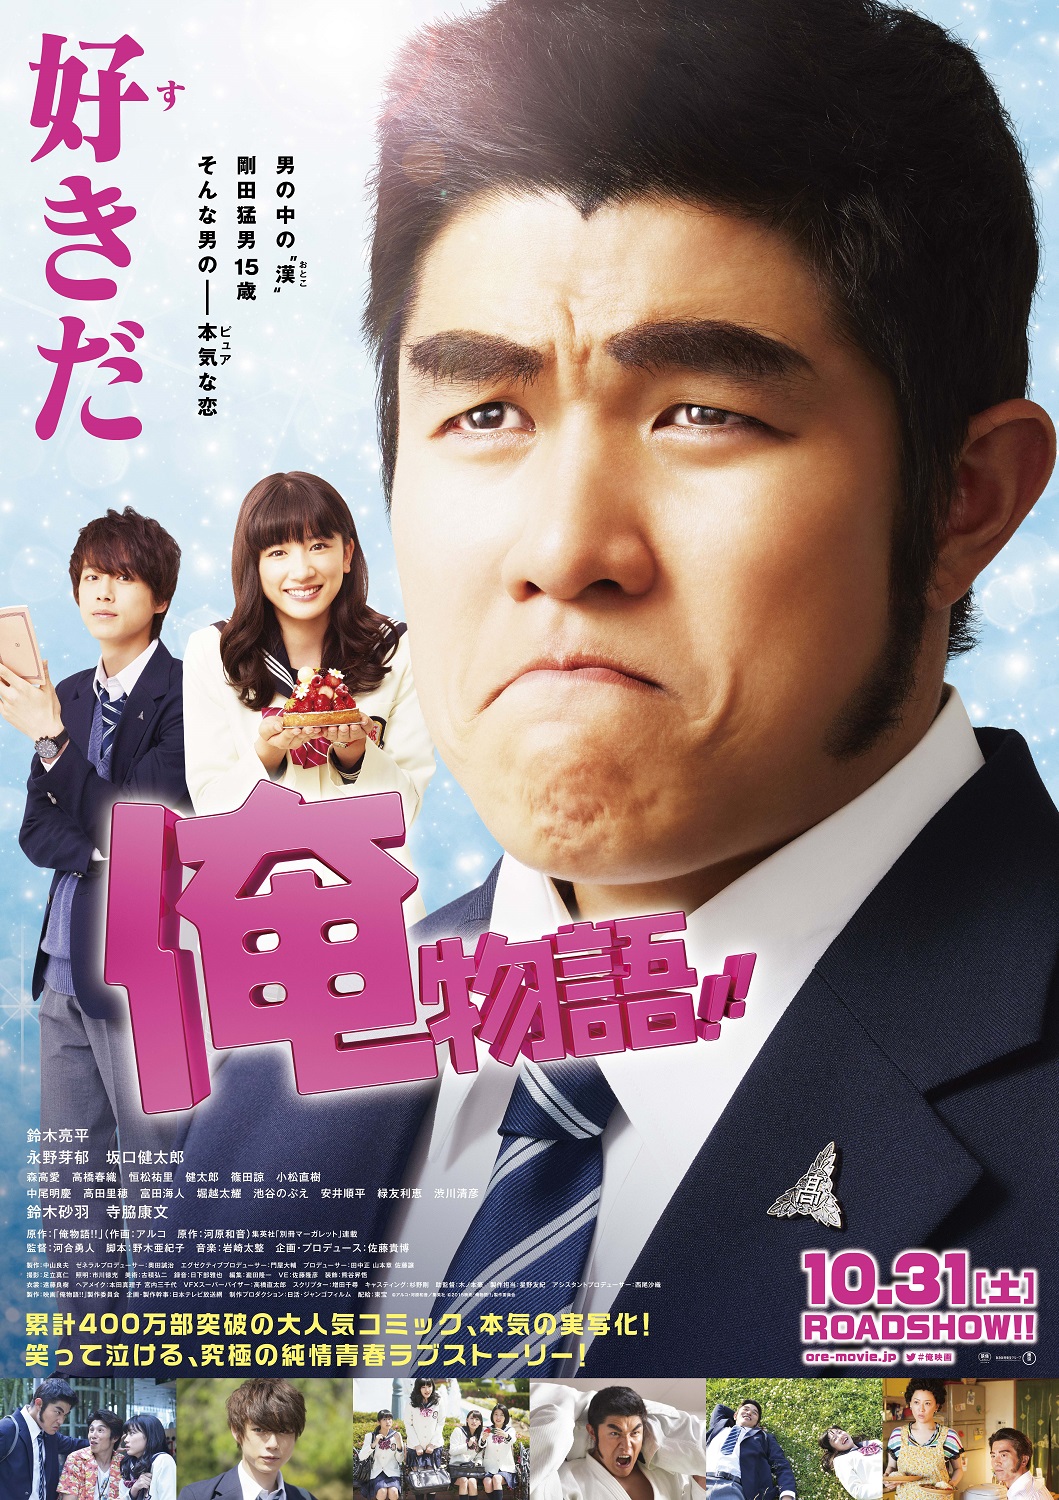  My.Love.Story.2015.JAPANESE.1080p.BluRay.x264.DTS-WiKi 9.75GB-1.png